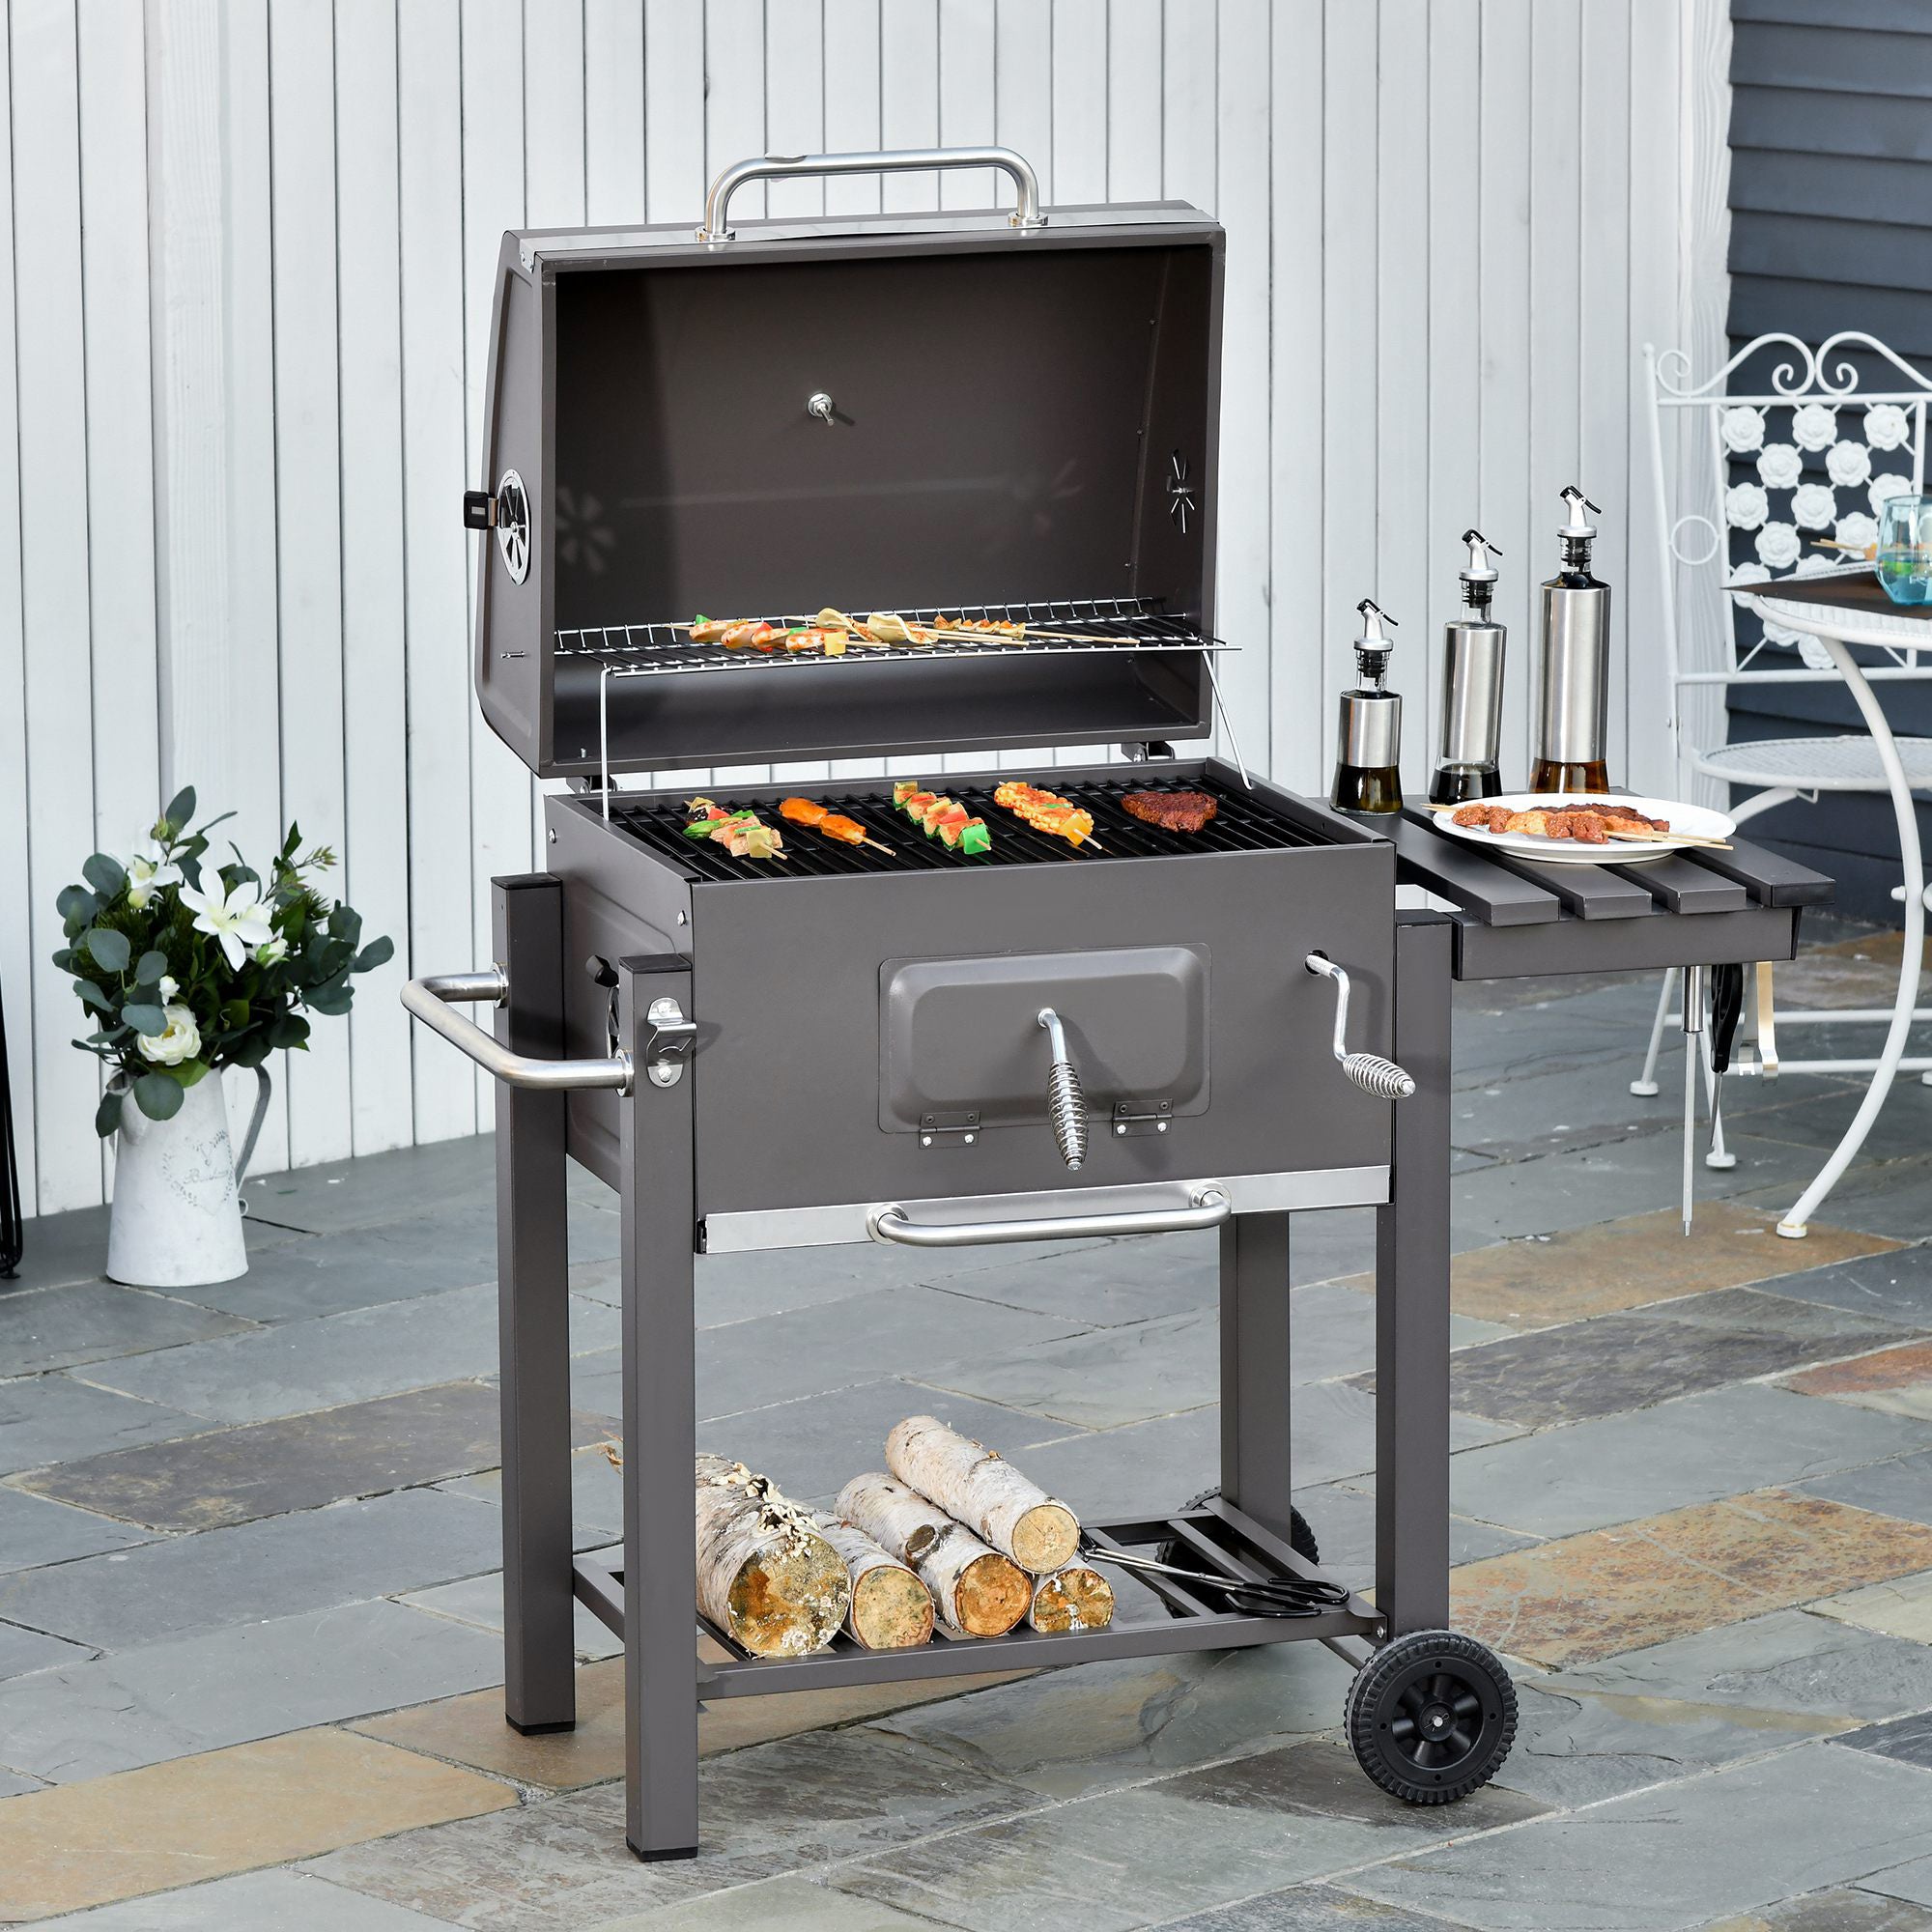 Charcoal Grill BBQ Trolley Smoker Barbecue Shelf Side Table Wheels - Inspirely